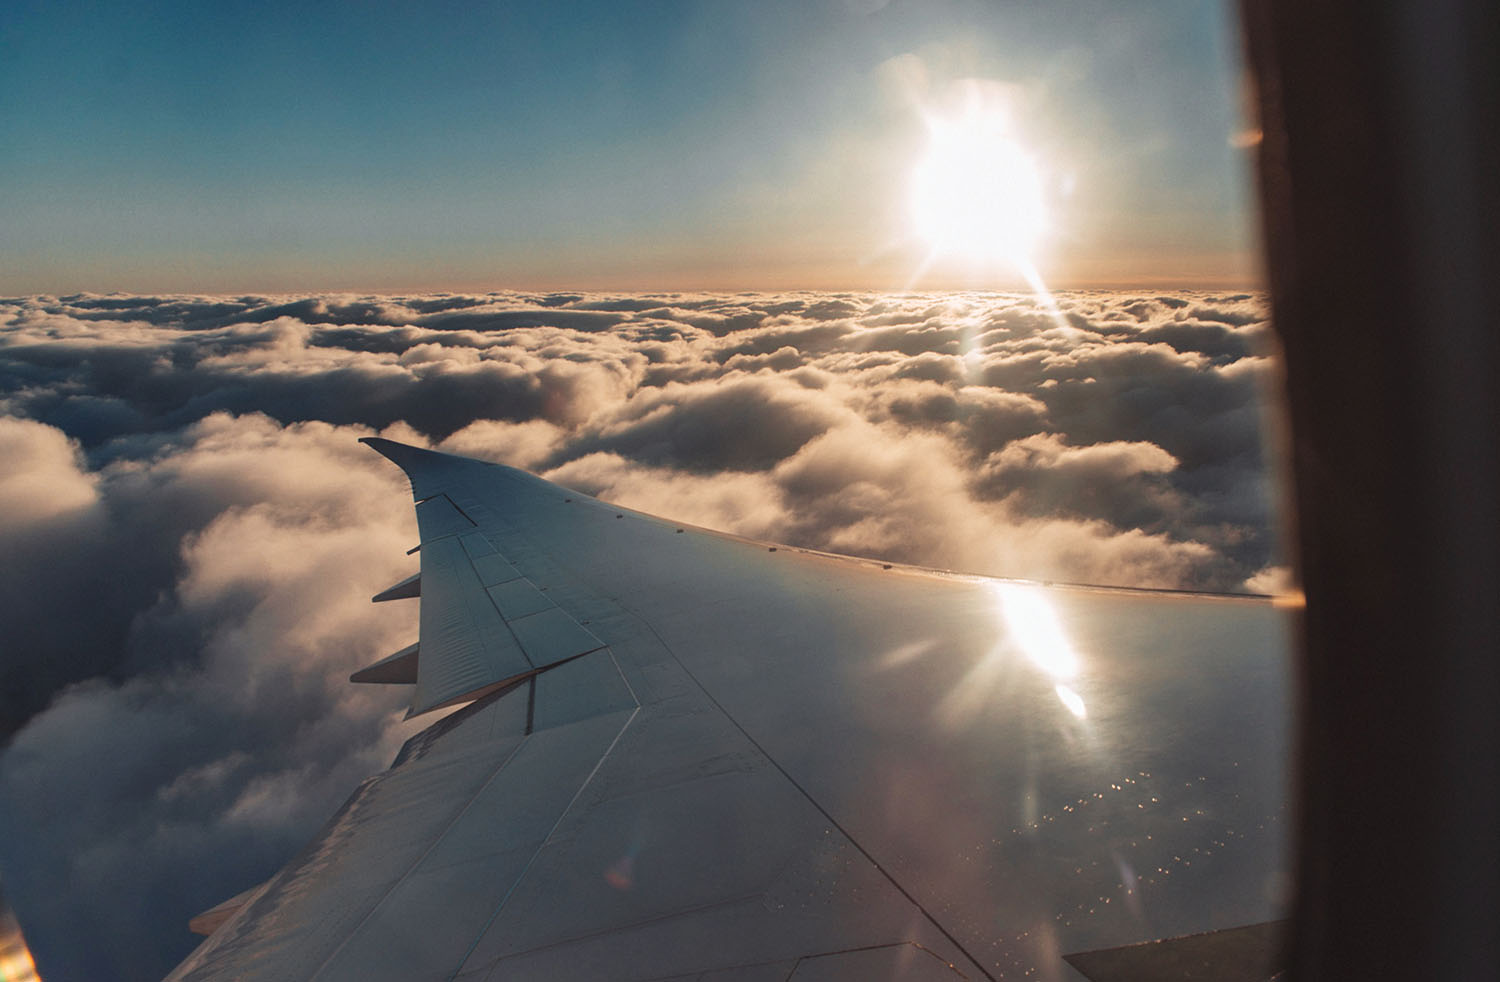 Airplane view: Sunset over clouds